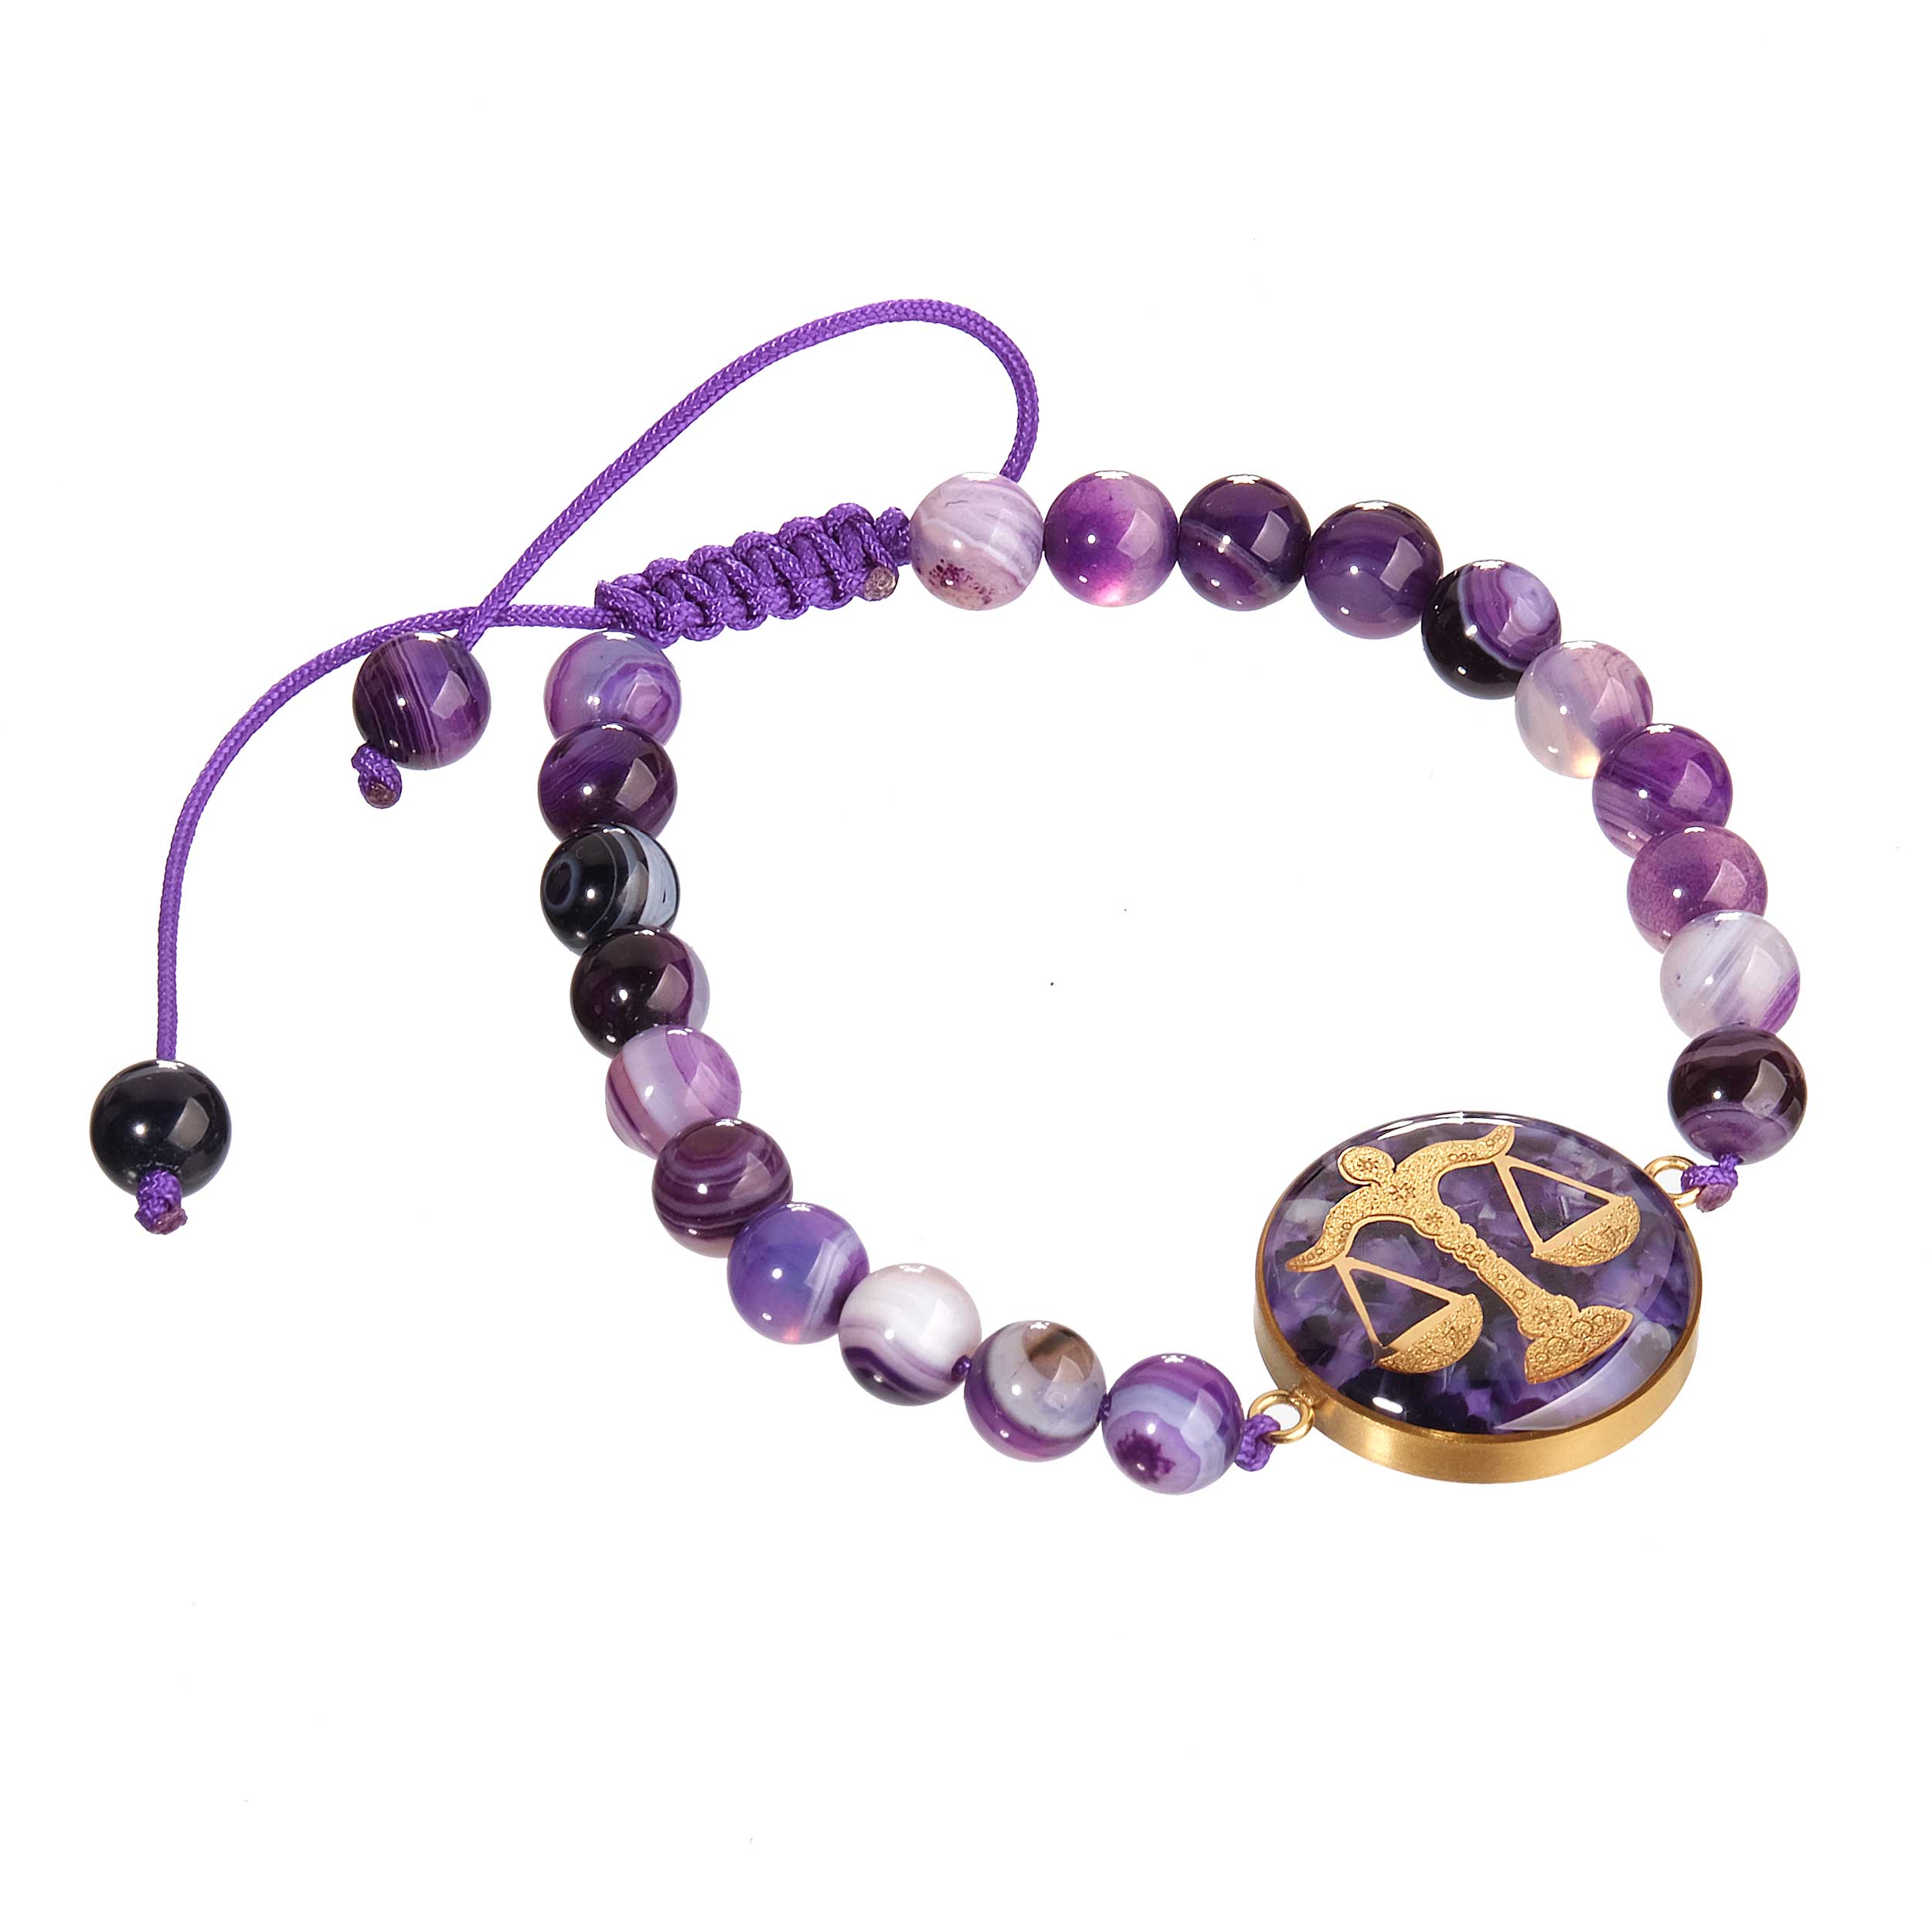 wholesale Purple agate stone bracelet and 24 carat gold leaf with the symbol of October